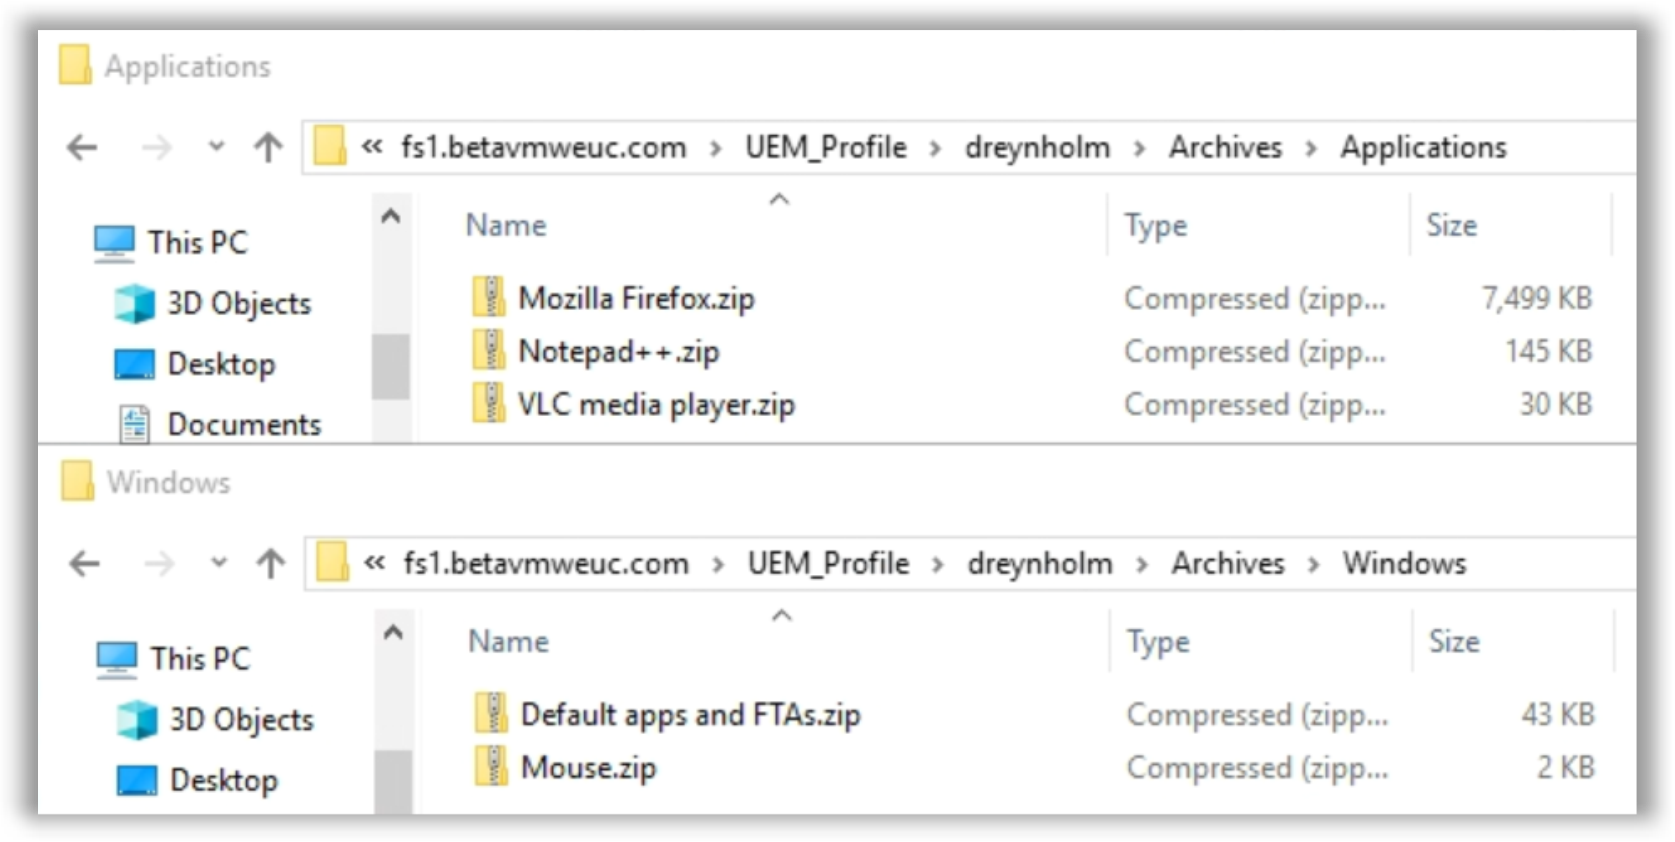 Sample Windows and Application Profile Archives